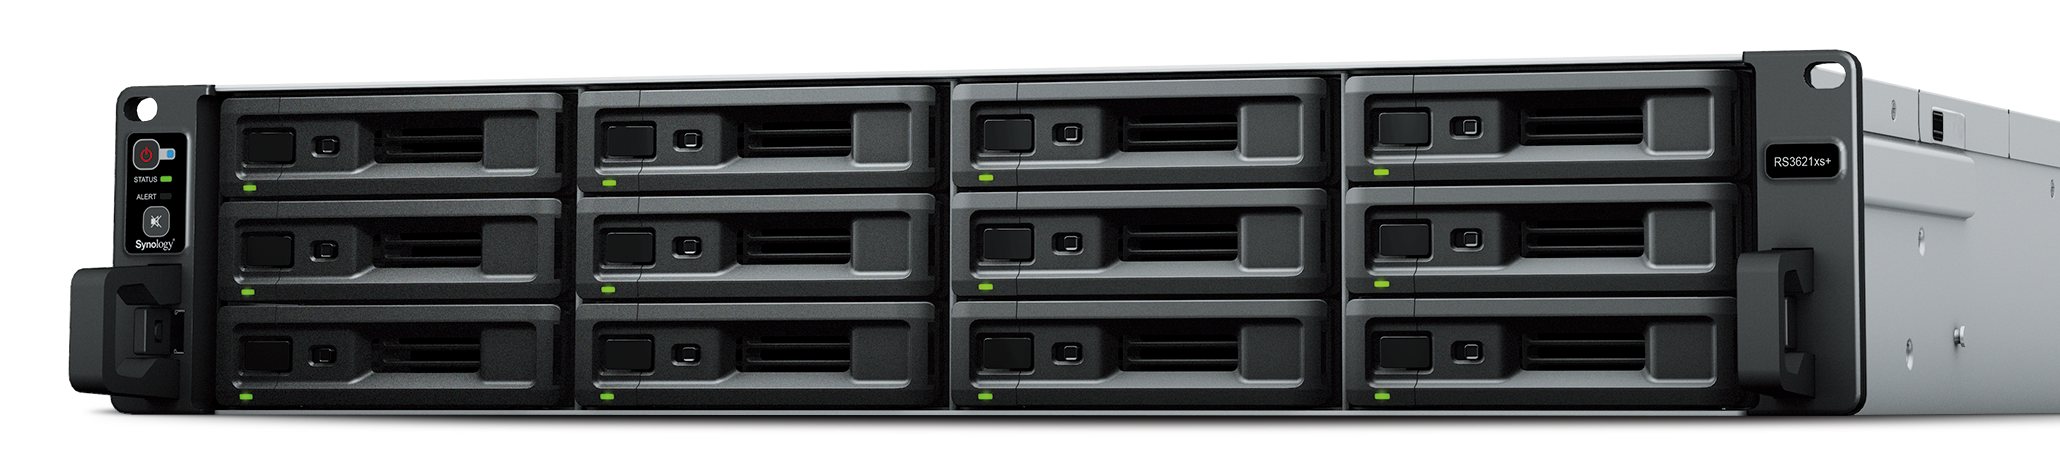 ,Black Synology Rack Station Network Attached Storage with iSCSI RC18015xs+ 